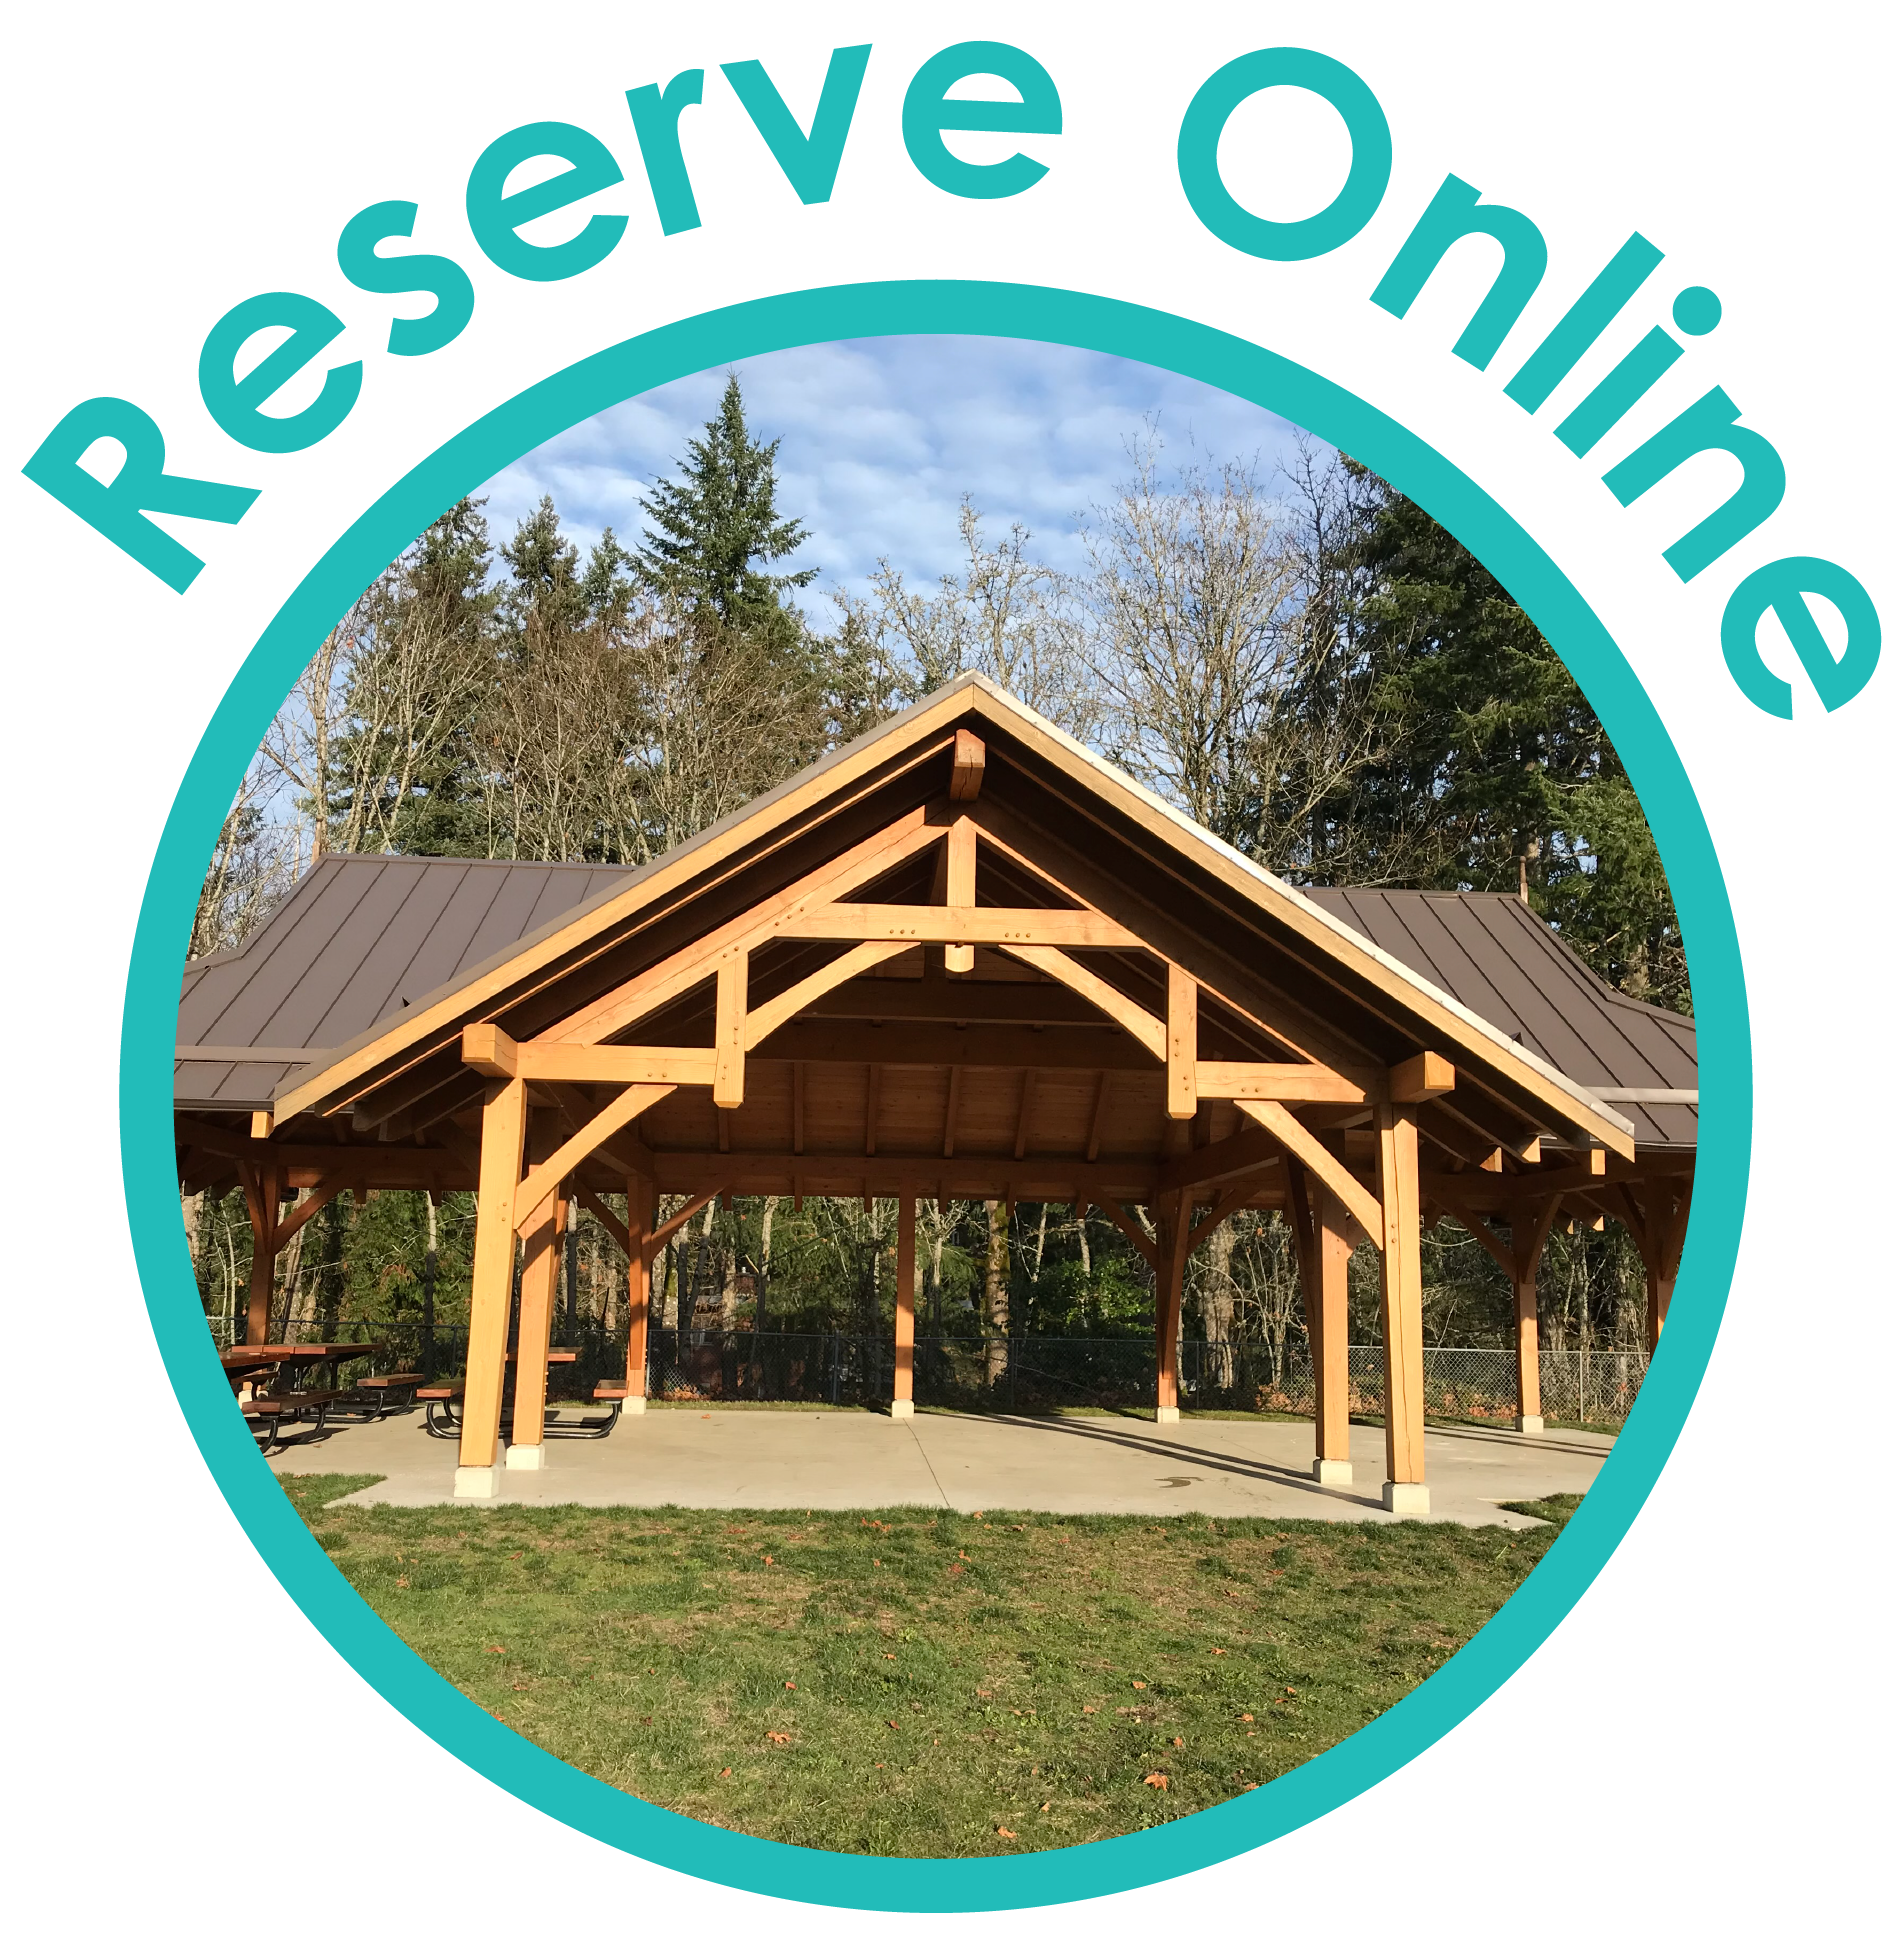 Clickable icon to reserve a picnic shelter online  Opens in new window